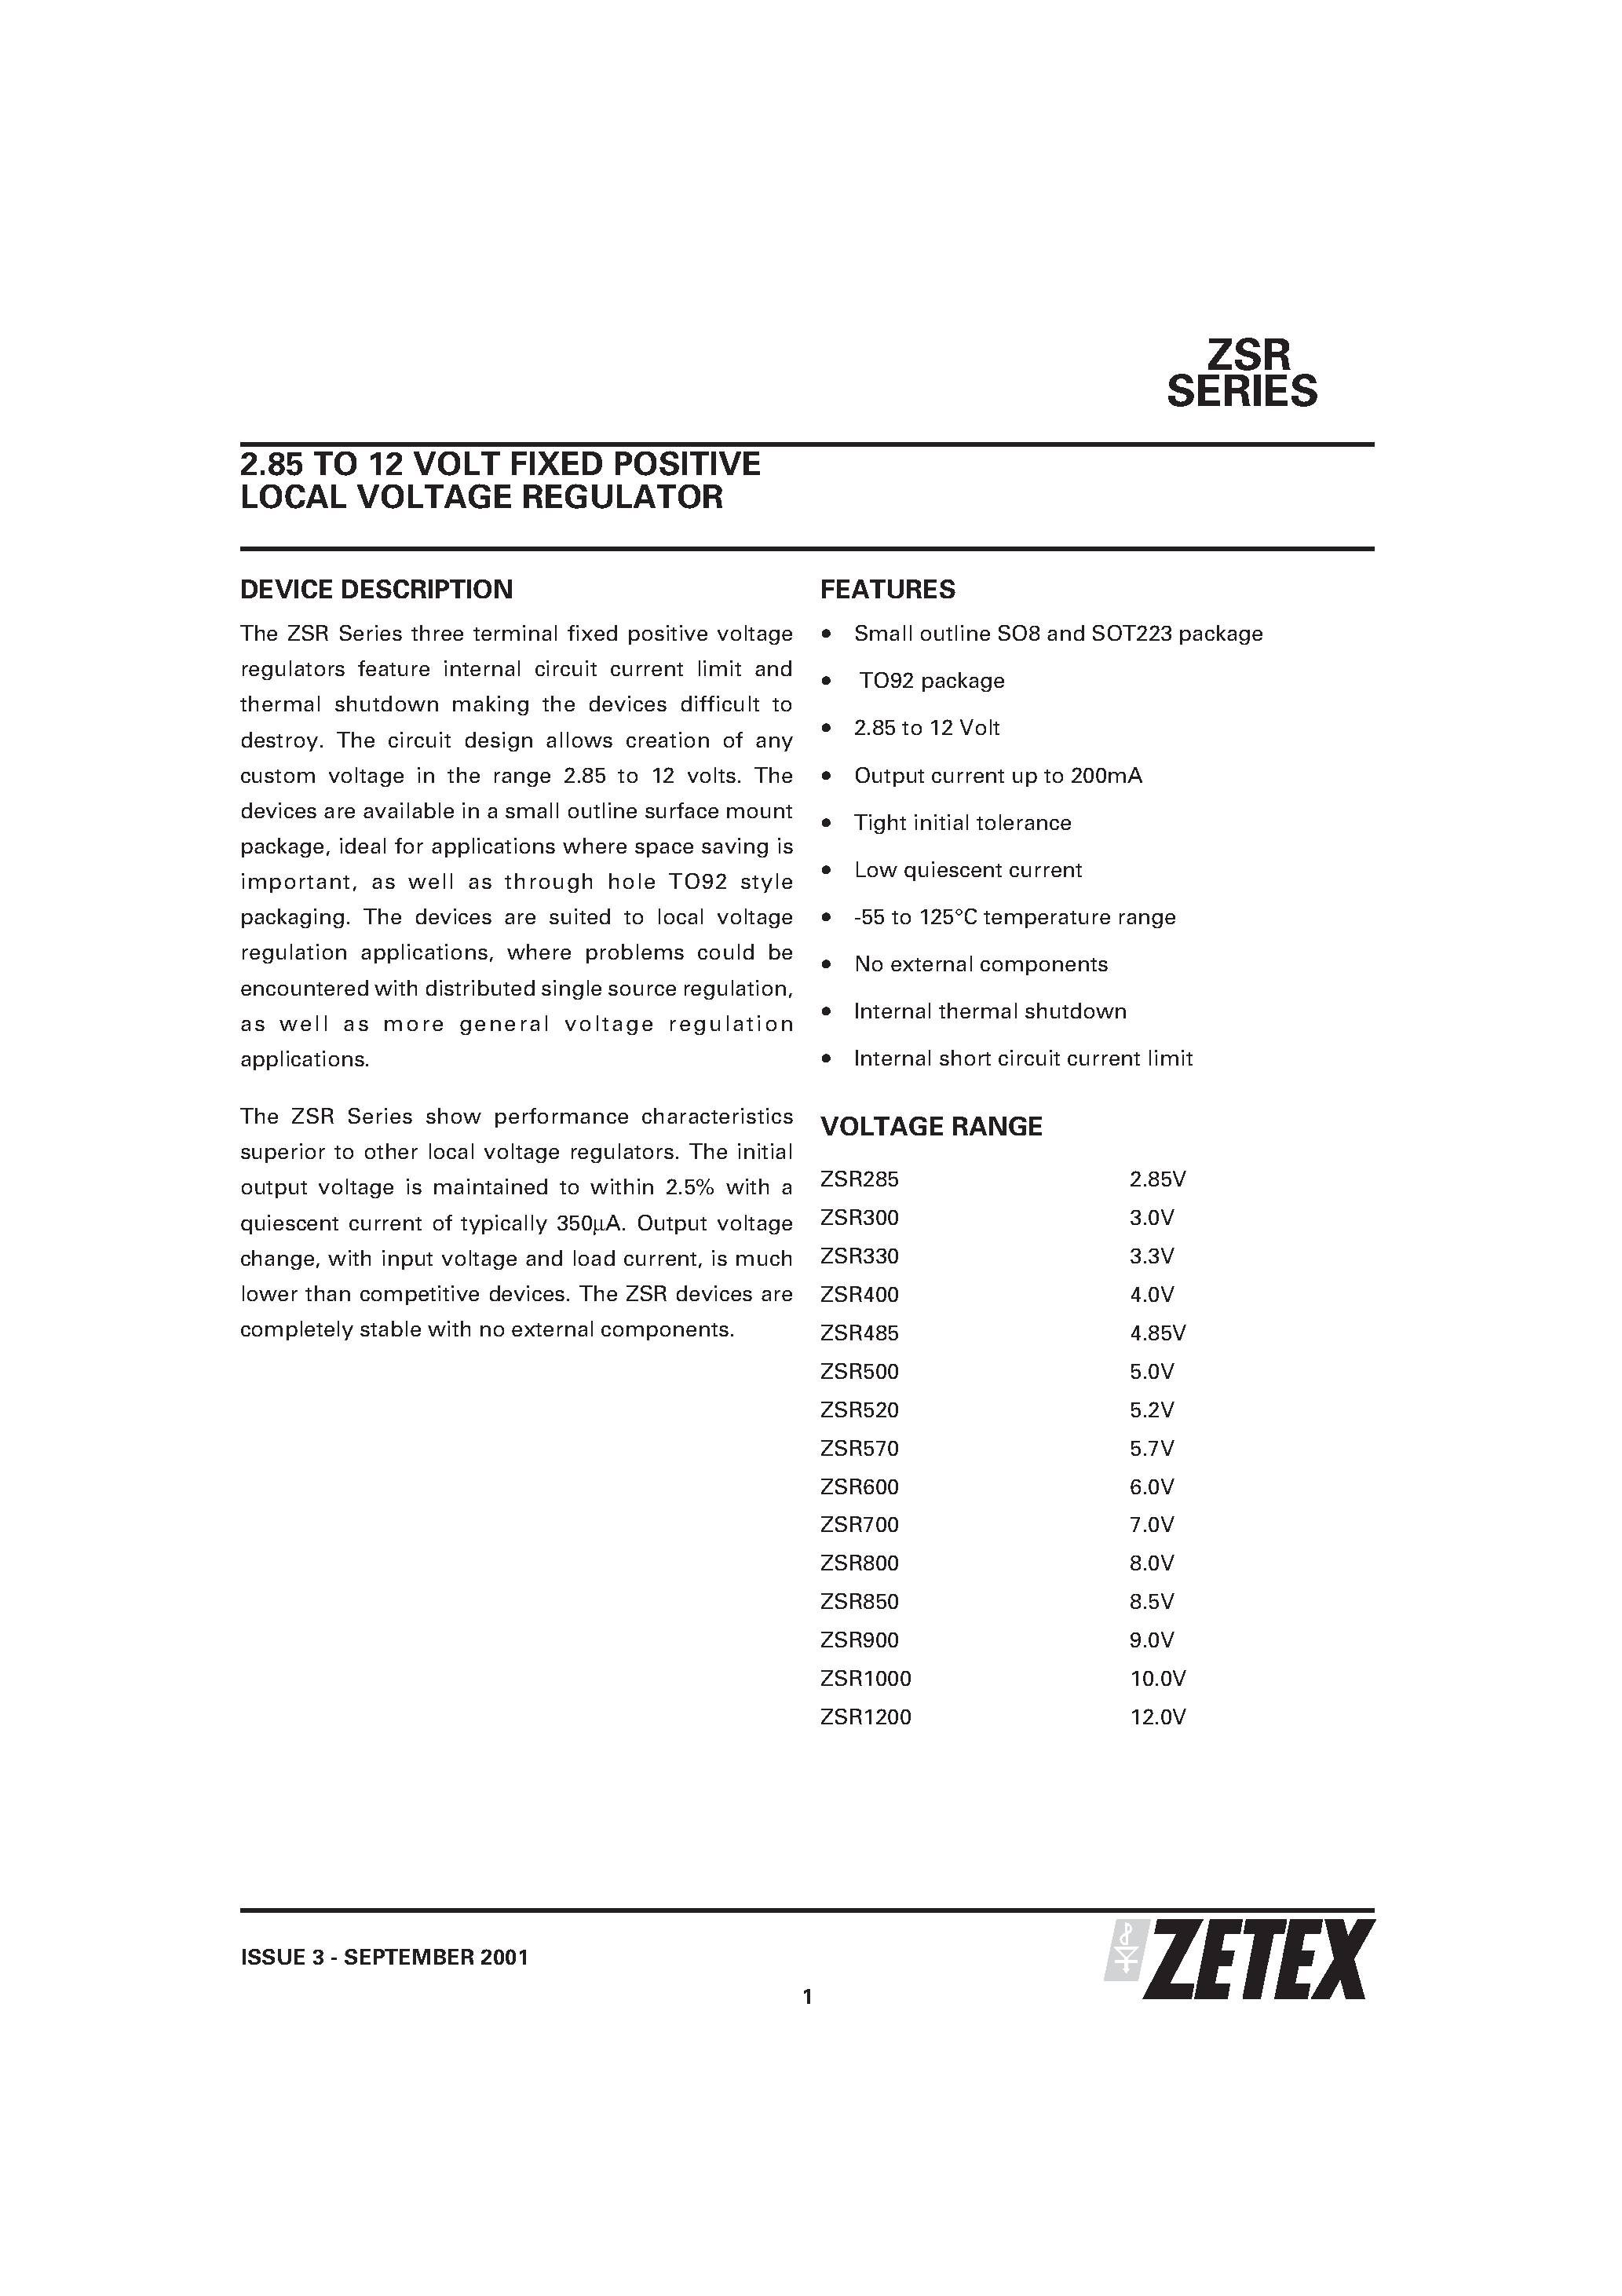 Datasheet ZSR400G - 2.85 TO 12 VOLT FIXED POSITIVE LOCAL VOLTAGE REGULATOR page 1